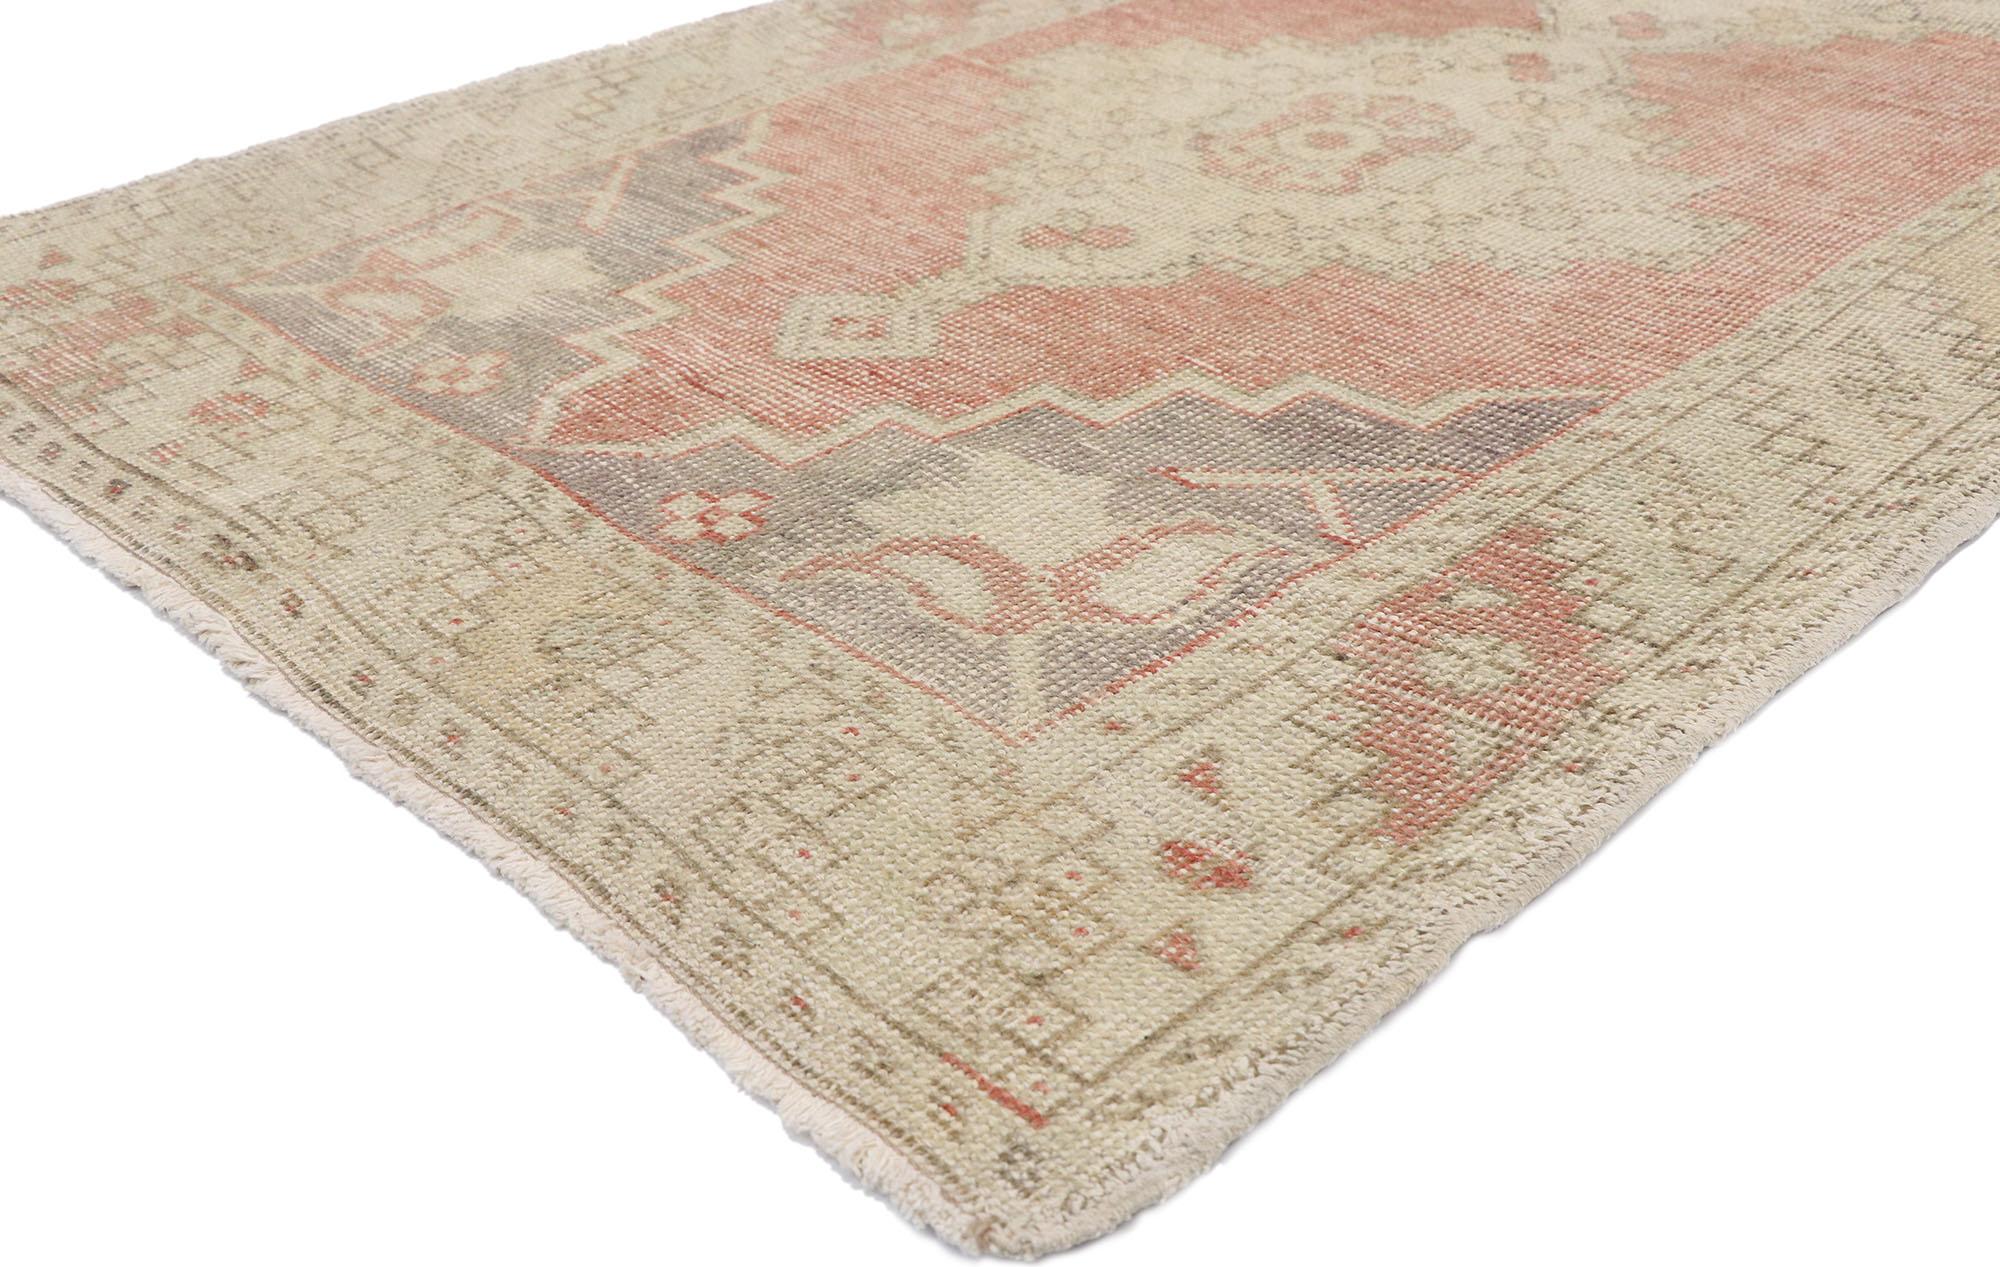 52721, distressed vintage Turkish Oushak runner with romantic rustic style 03'04 x 10'03. A beautiful combination of warm tones and light hues, this hand knotted wool distressed vintage Turkish Oushak runner charms with ease. It features four